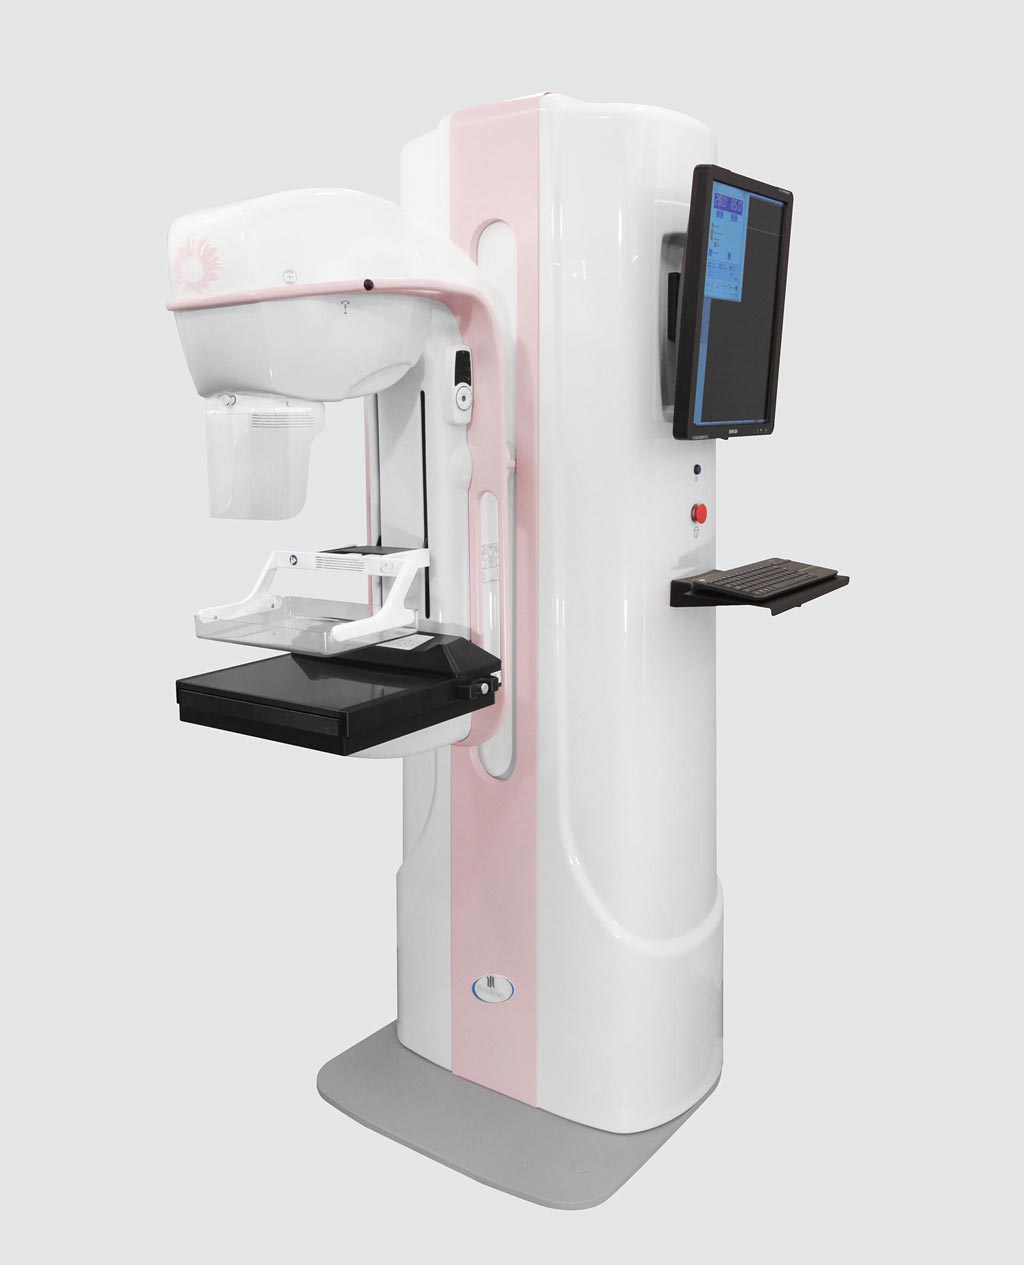 Image: The Helianthus C mammography system (Photo courtesy of Metaltronica).